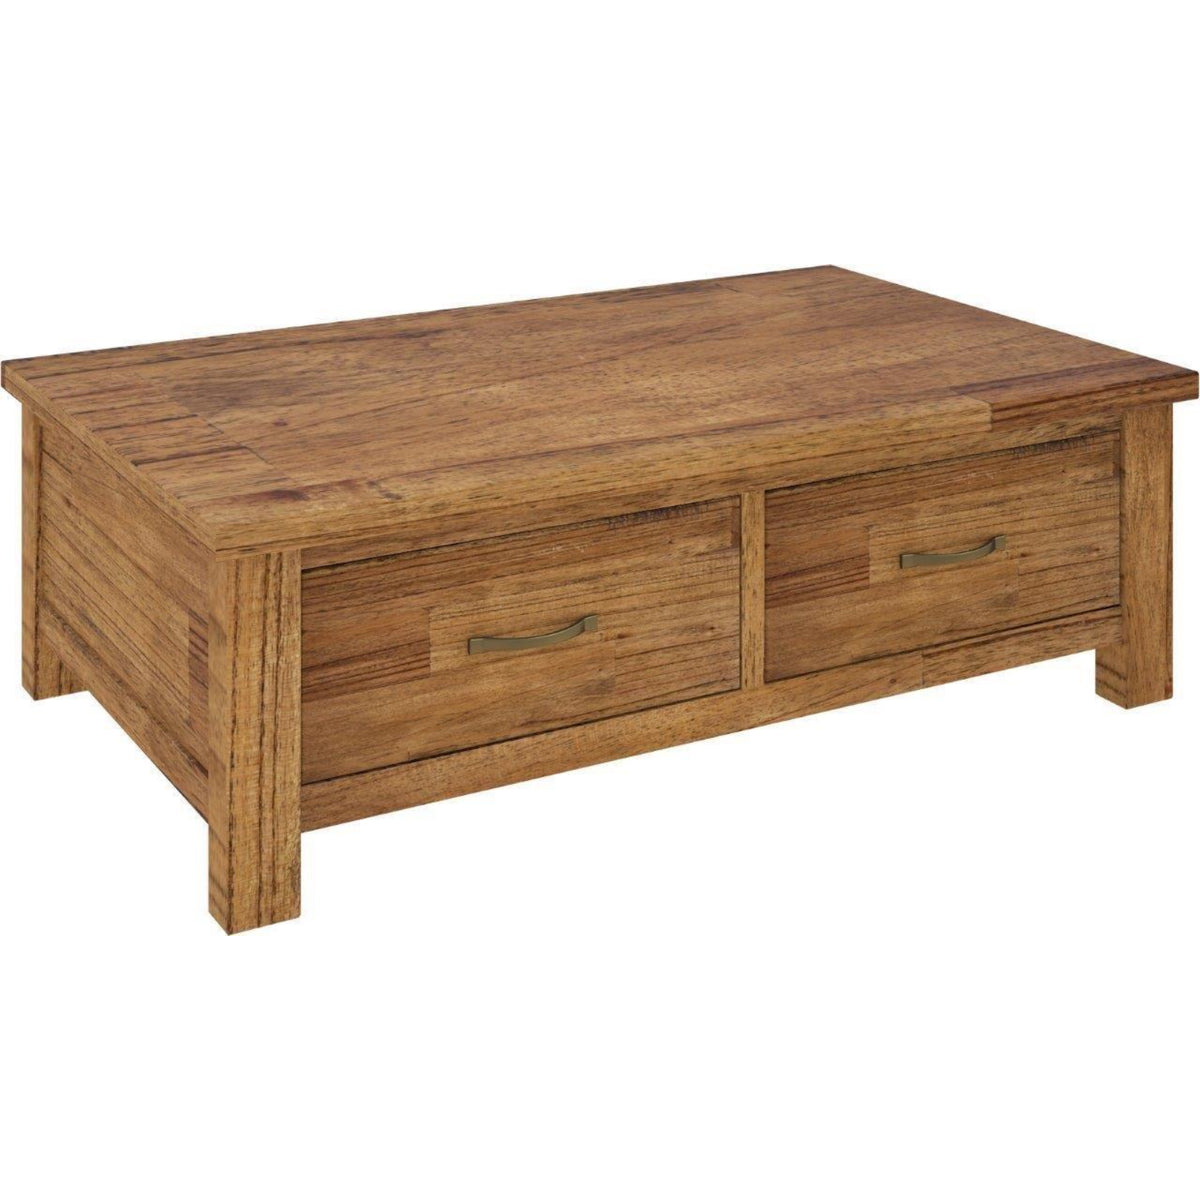 Birdsville Solid Mt Ash Timber Wood Coffee Table with 2 Drawer - Brown - Notbrand